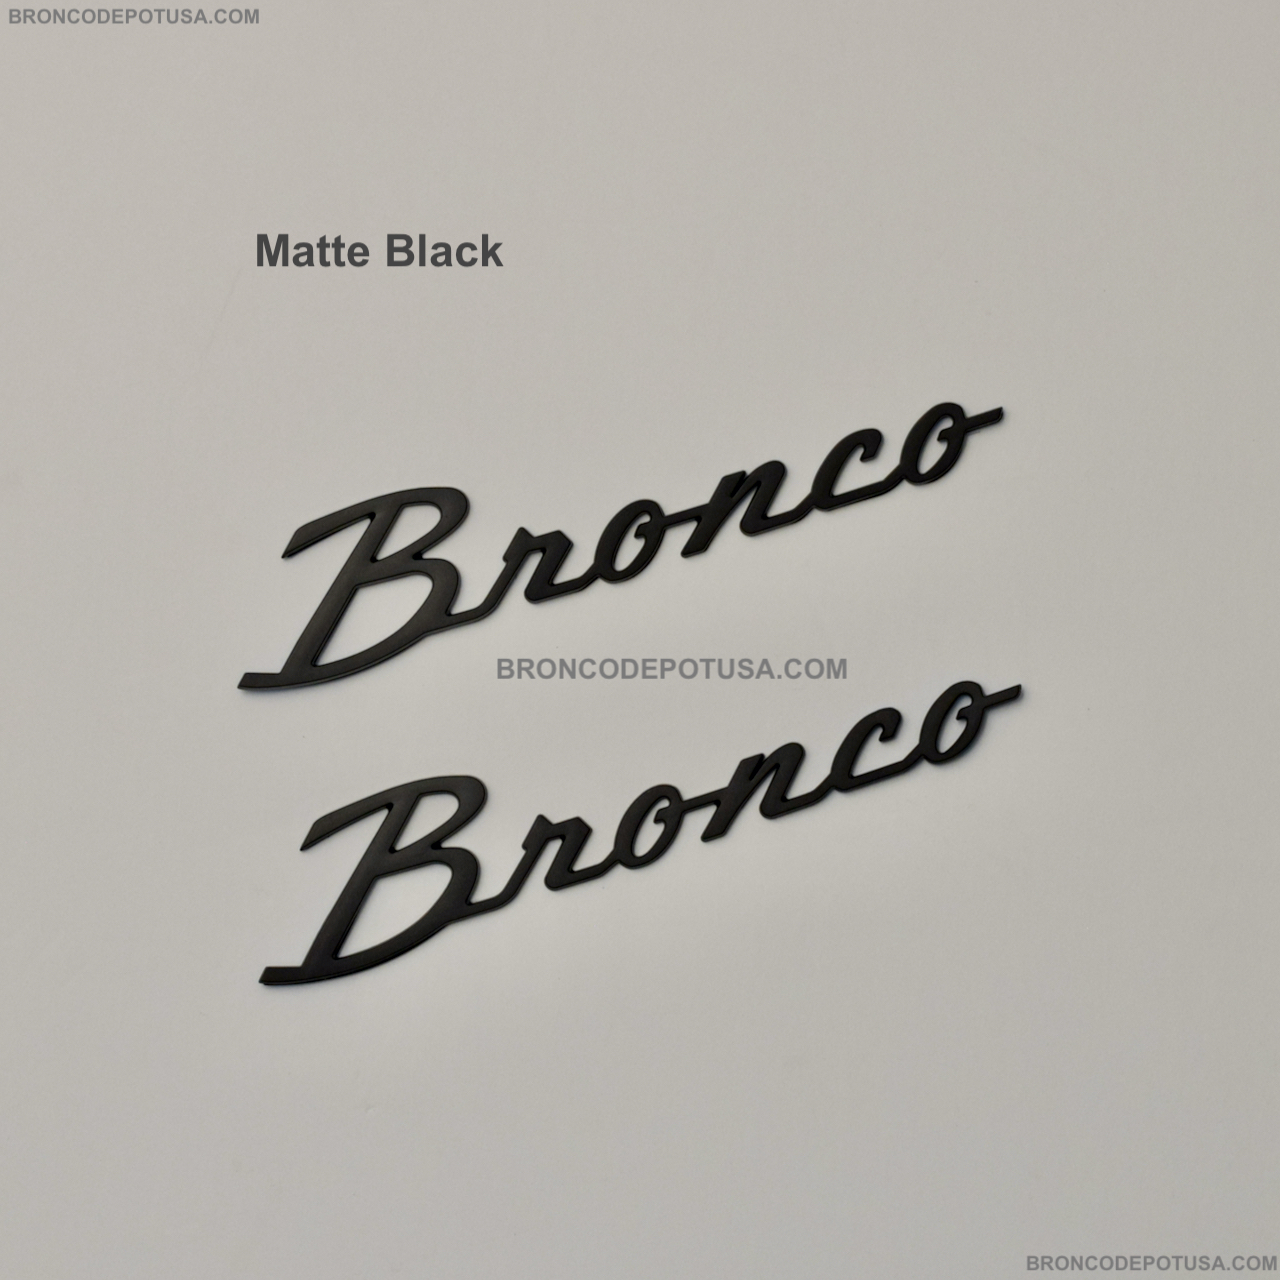 Ford Bronco Adhesive backed Heritage Bronco Fender Badges by BroncoDepotUSA [NO LONGER AVAILABLE] F6F088F7-961F-42FC-A741-AF245E924531